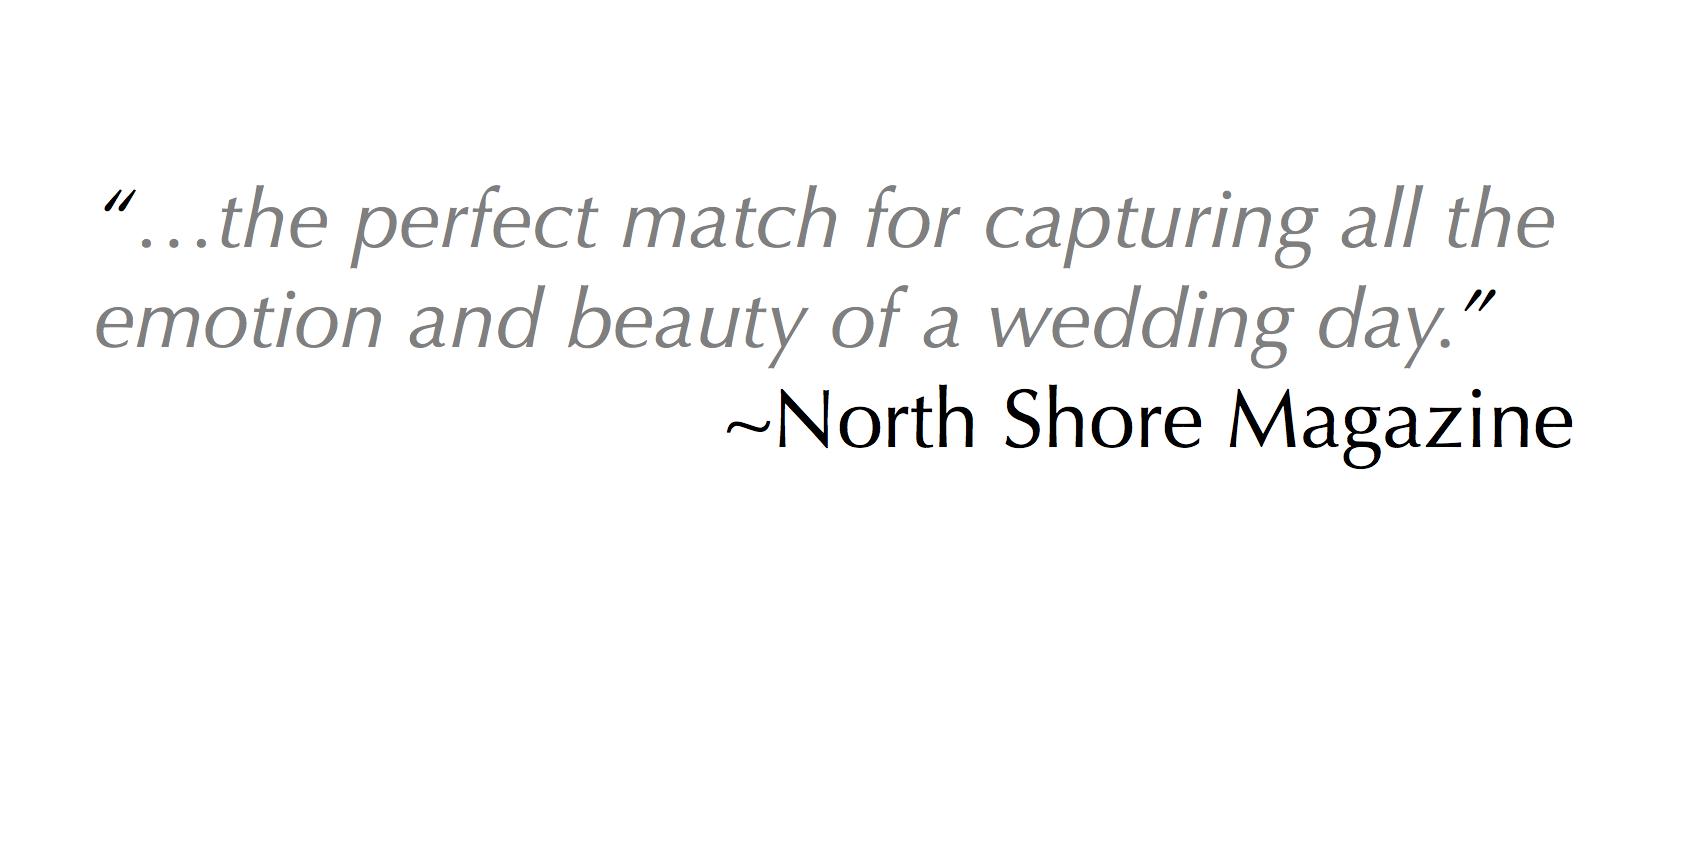 BONS NOrth shore magazine quote shortened.png